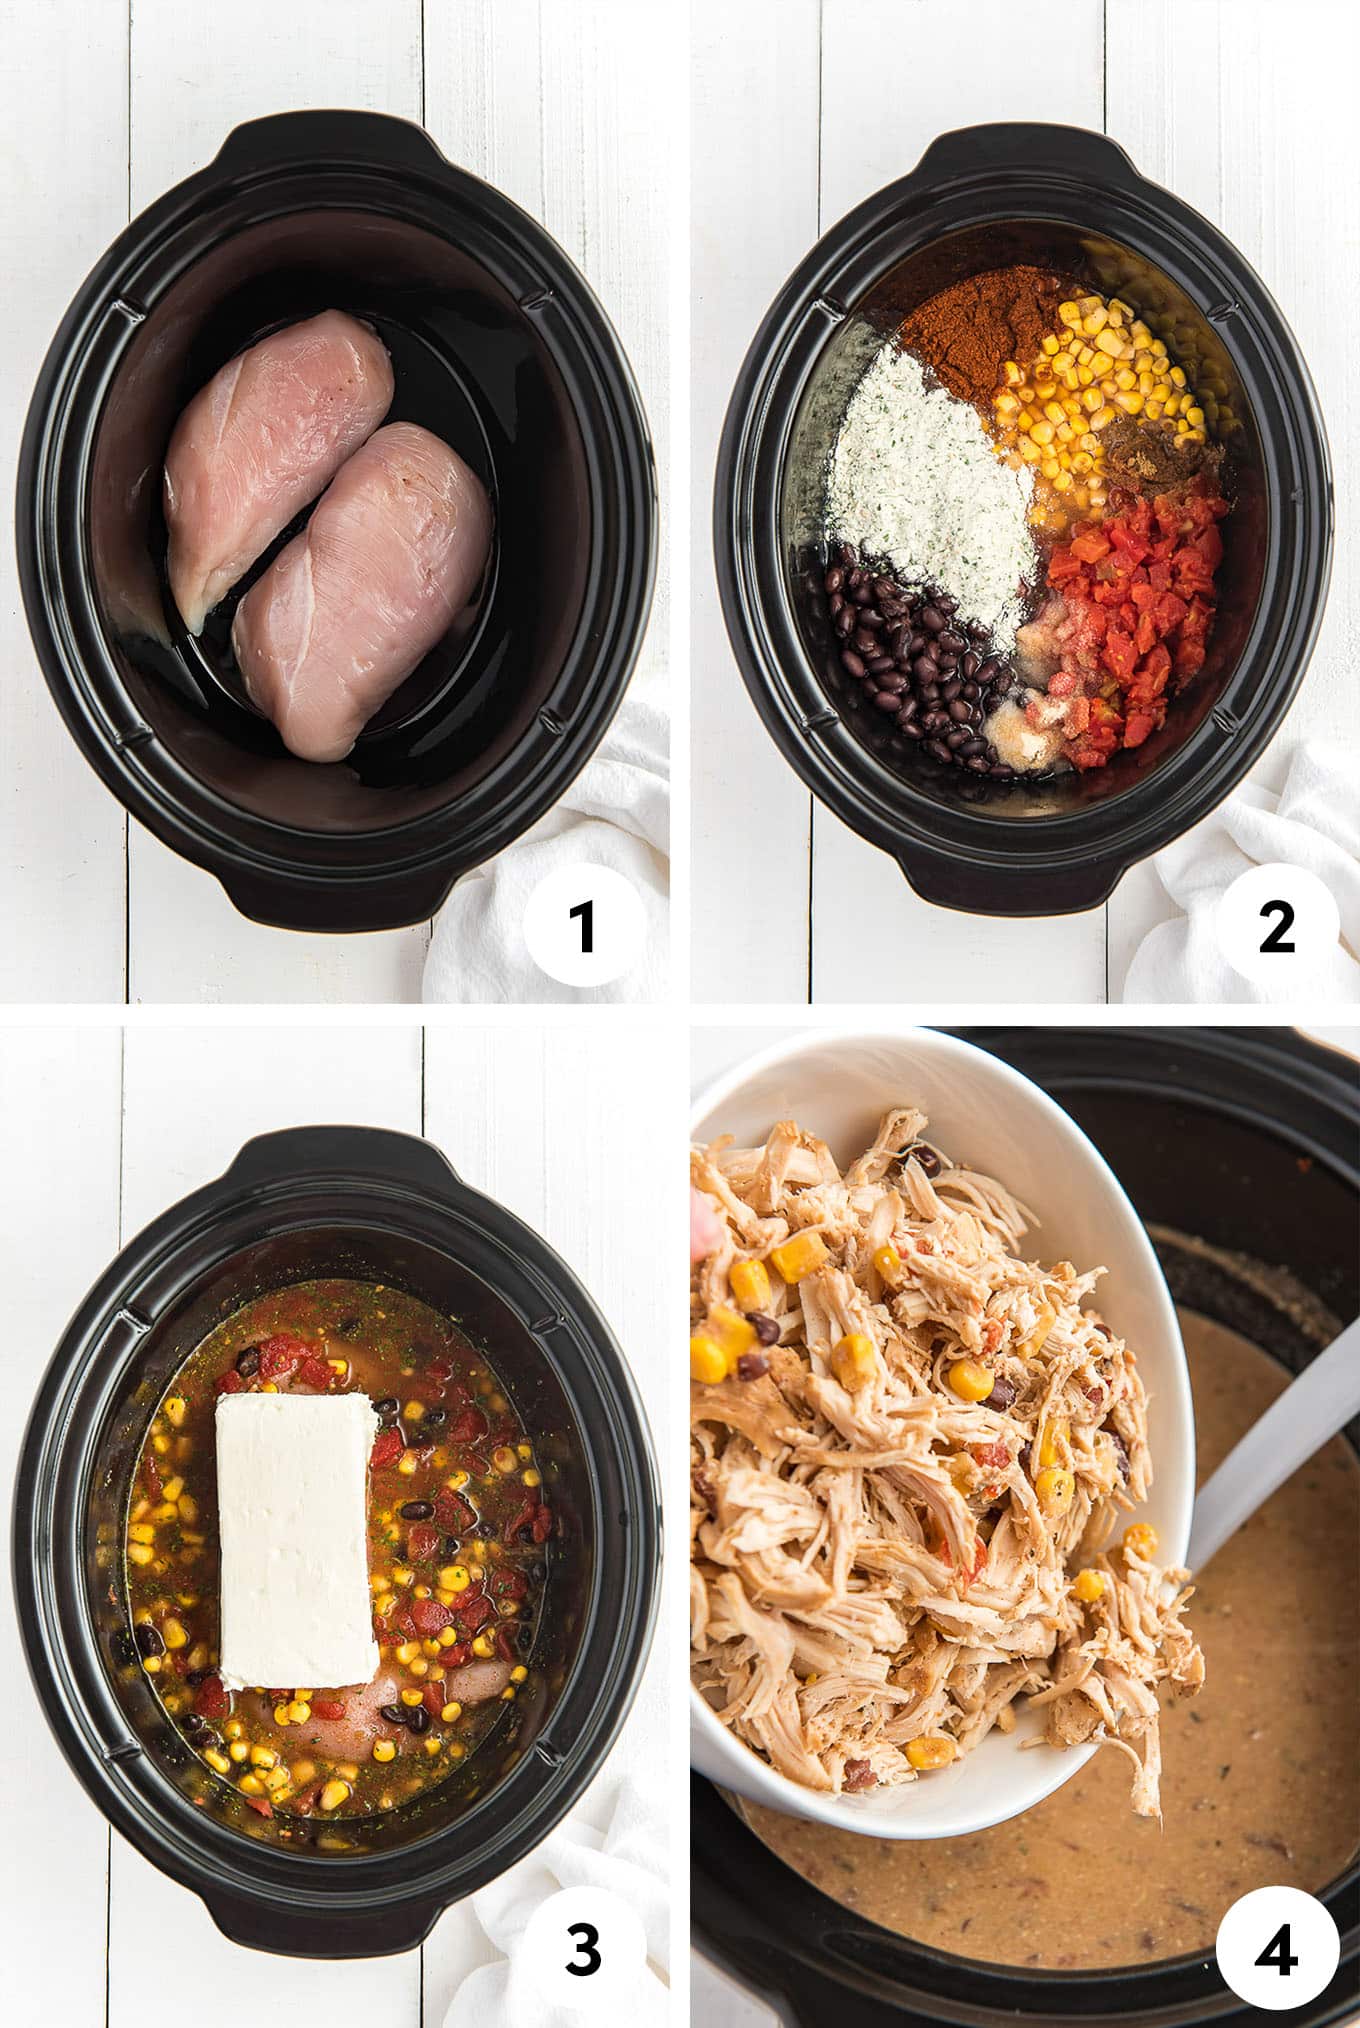 A collage of the chicken in the crockpot, topped with the other ingredients, the cream cheese block added, and finally adding the shredded chicken to the cooked white chili.